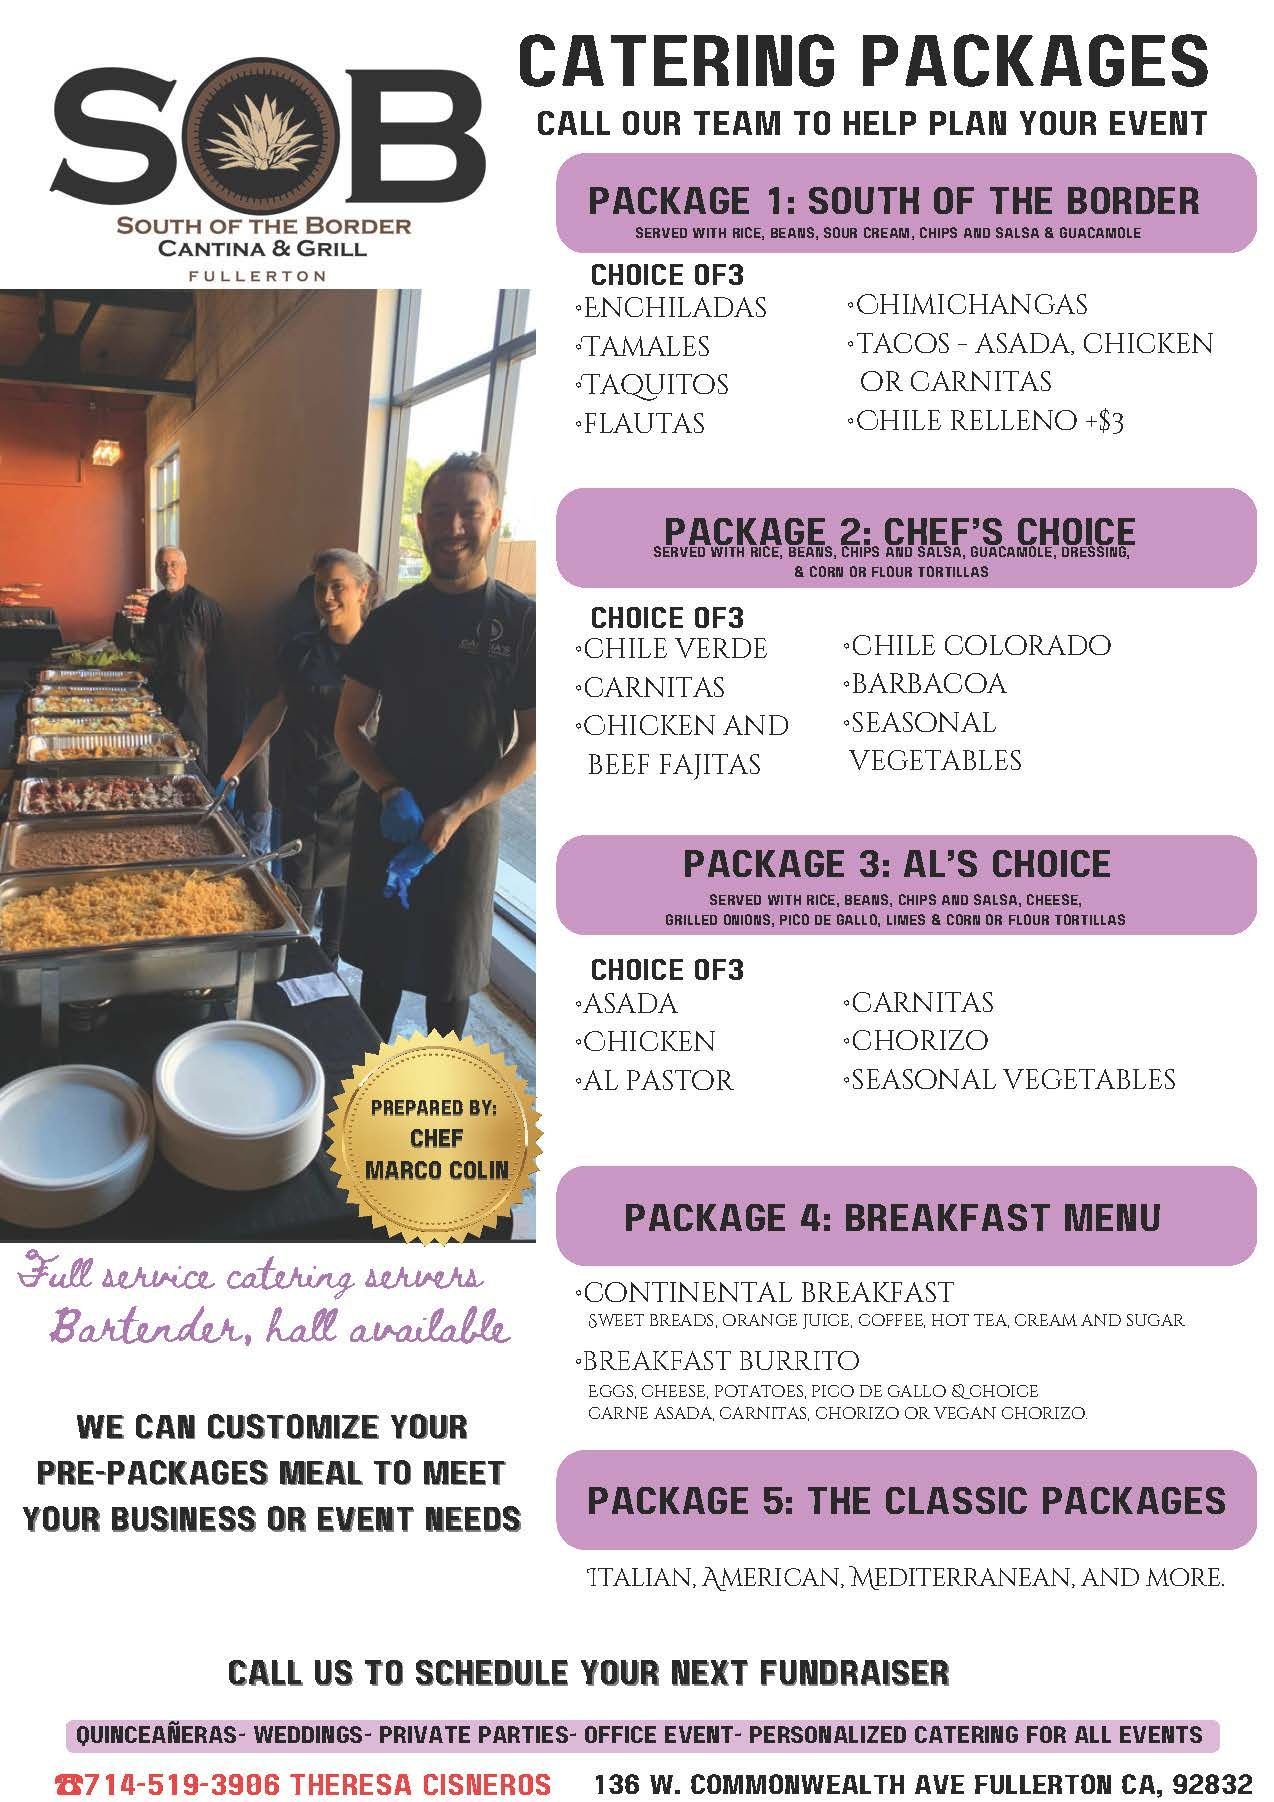 South of the Border Catering Packages